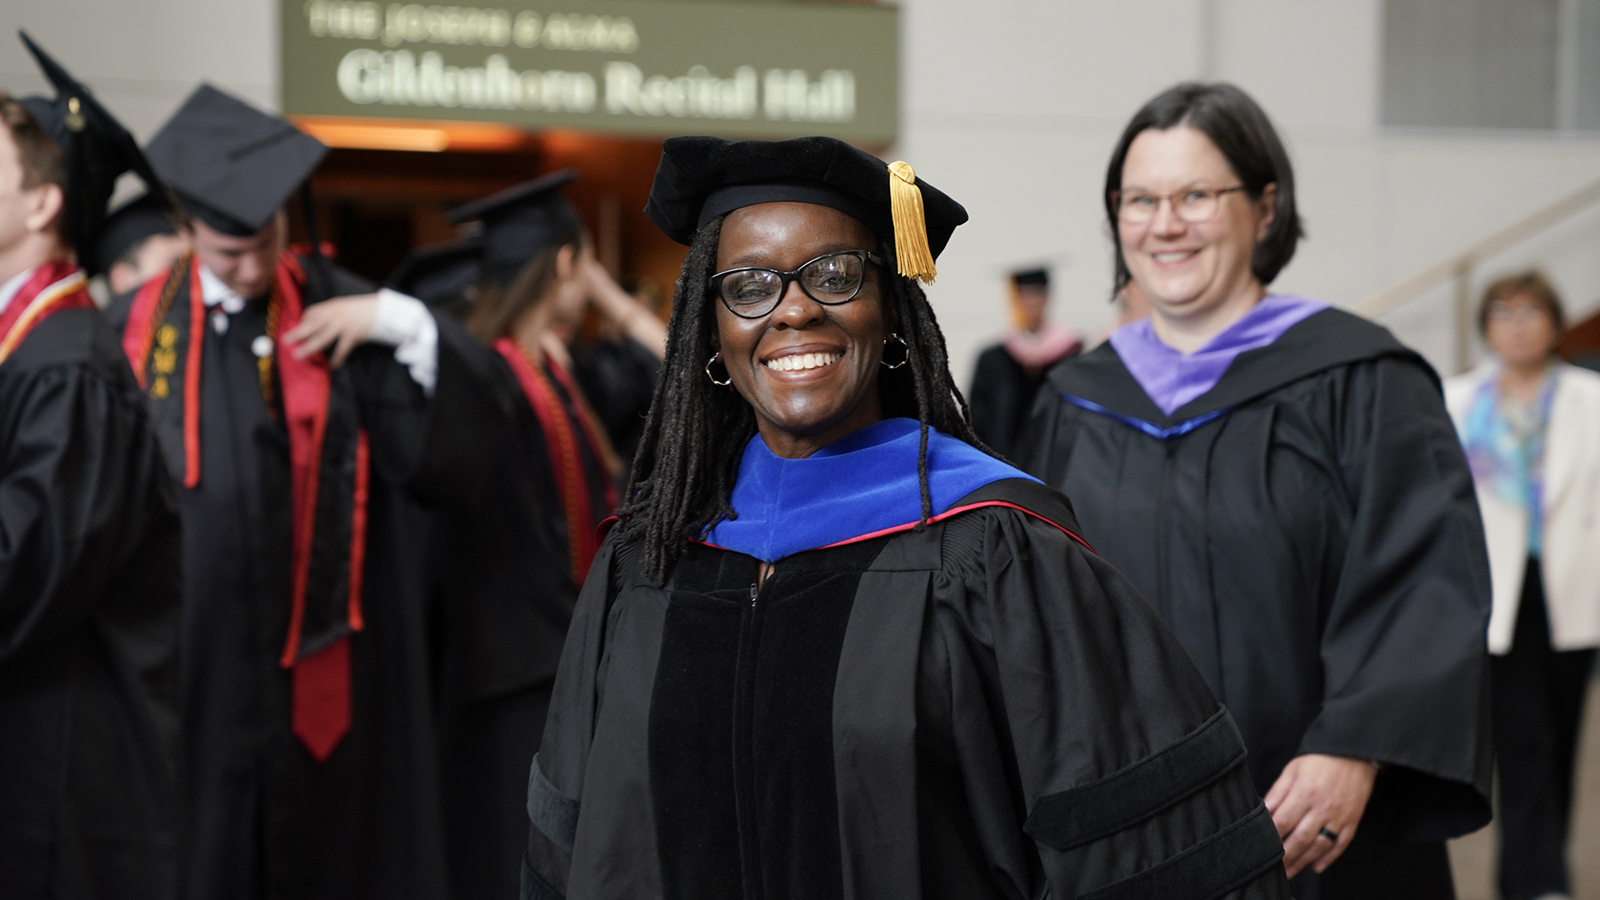 College of Arts and Humanities Dean Stephanie Shonekan at the School of Music's Spring 2023 Commencement Ceremony